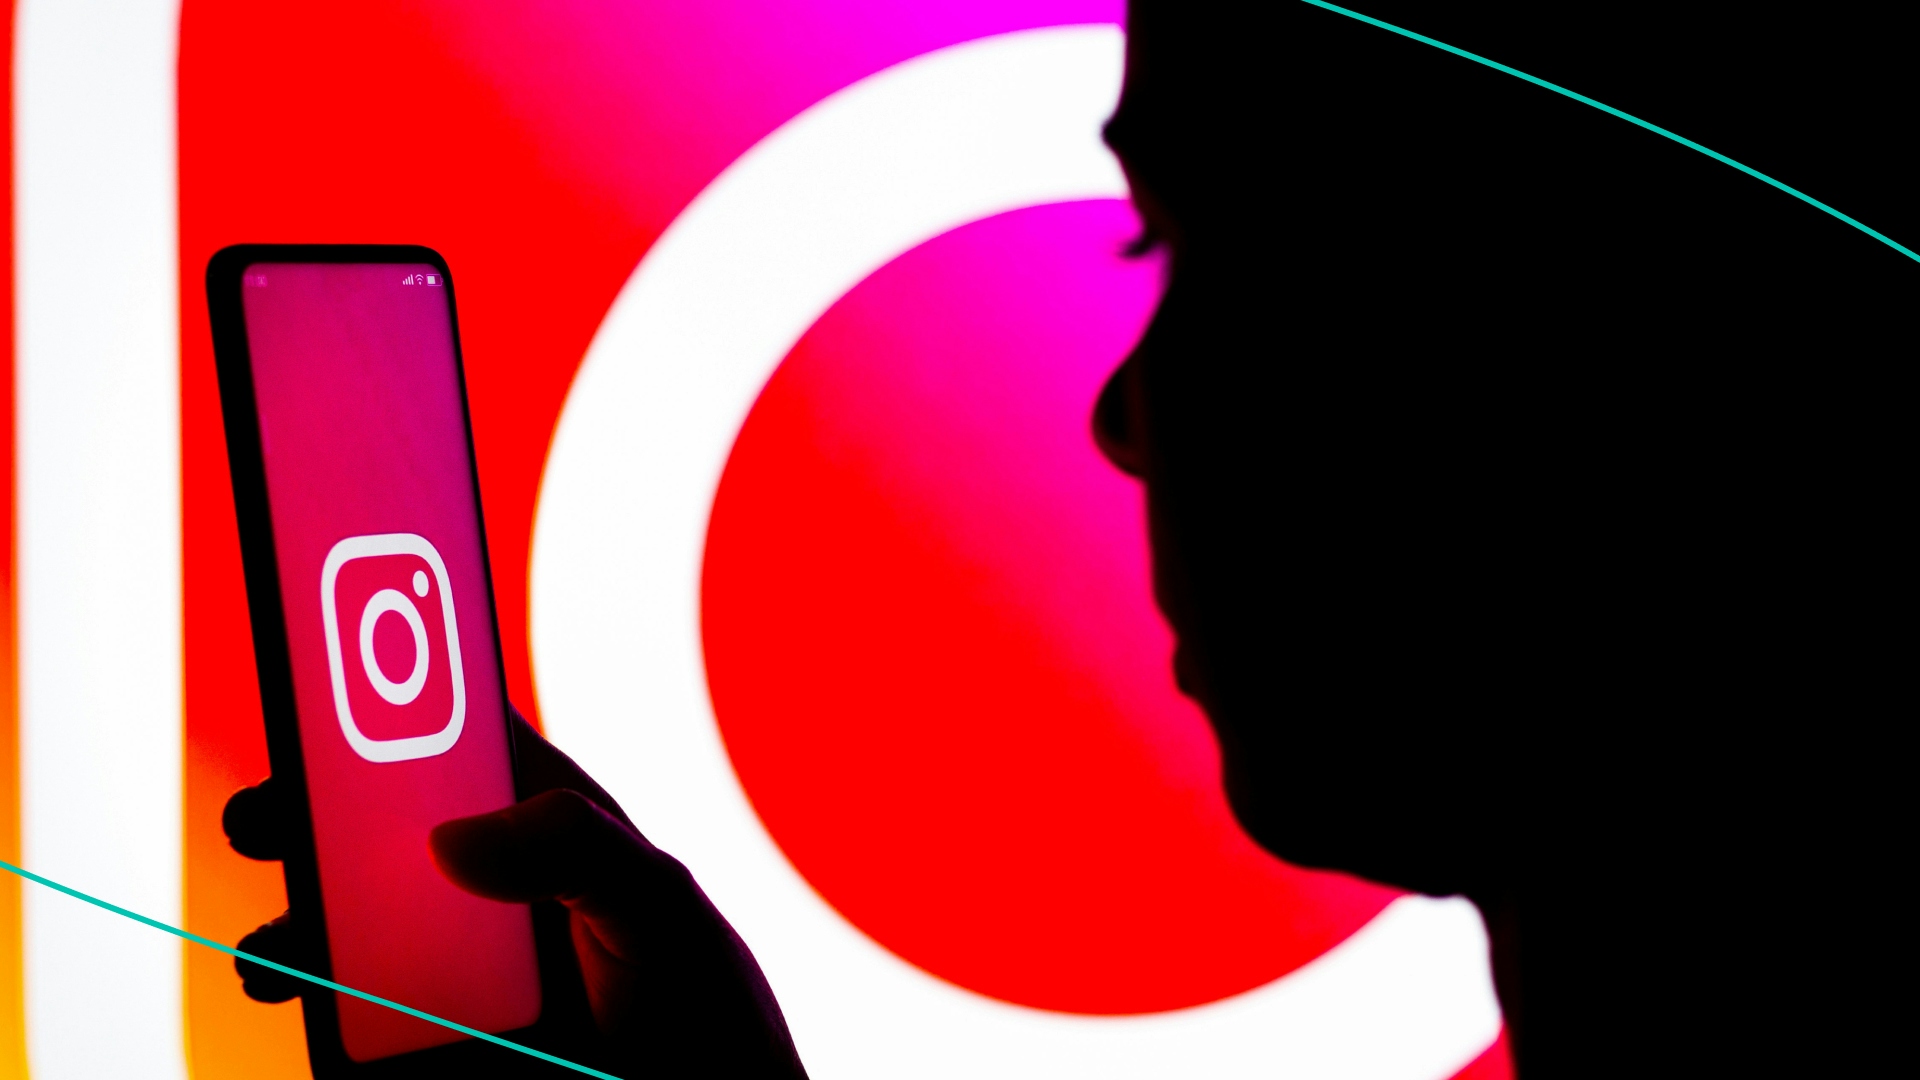 A woman's silhouette holds a smartphone with the Instagram logo displayed on the screen and in the background.